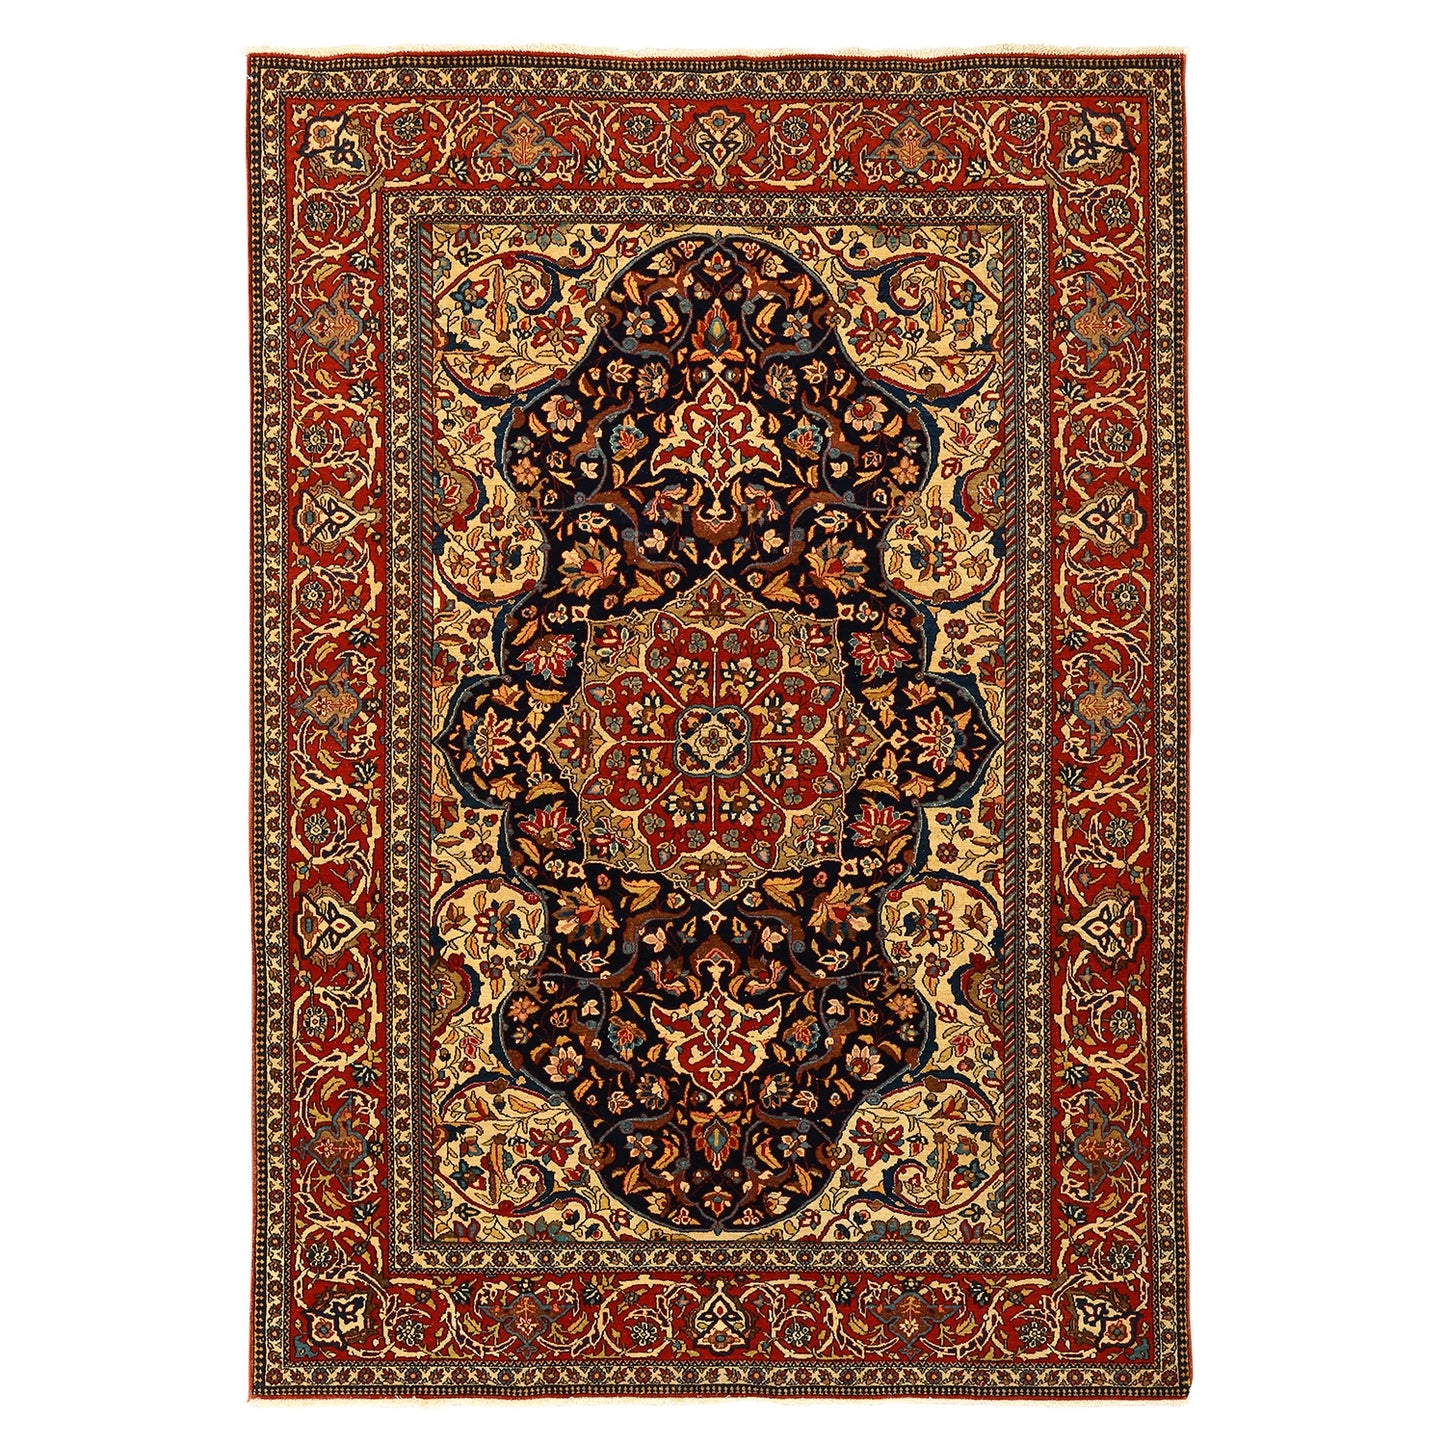 Antique Isfahan 6'10x4'10 5971